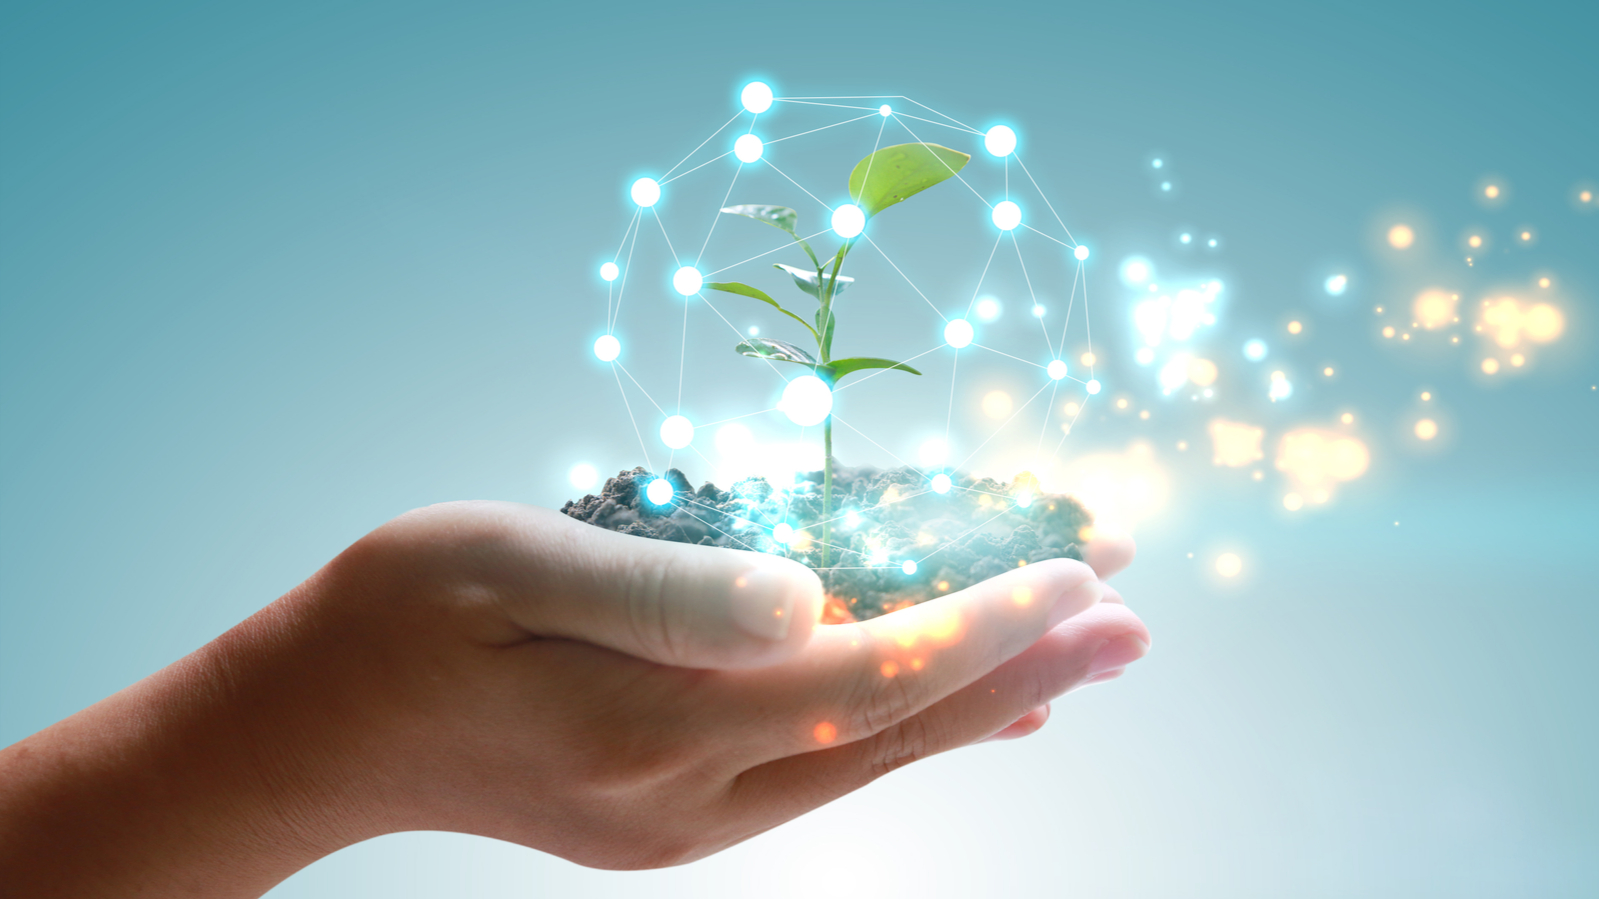 A conceptual image of a person's hands holding a plant surrounded by floating glowing particles